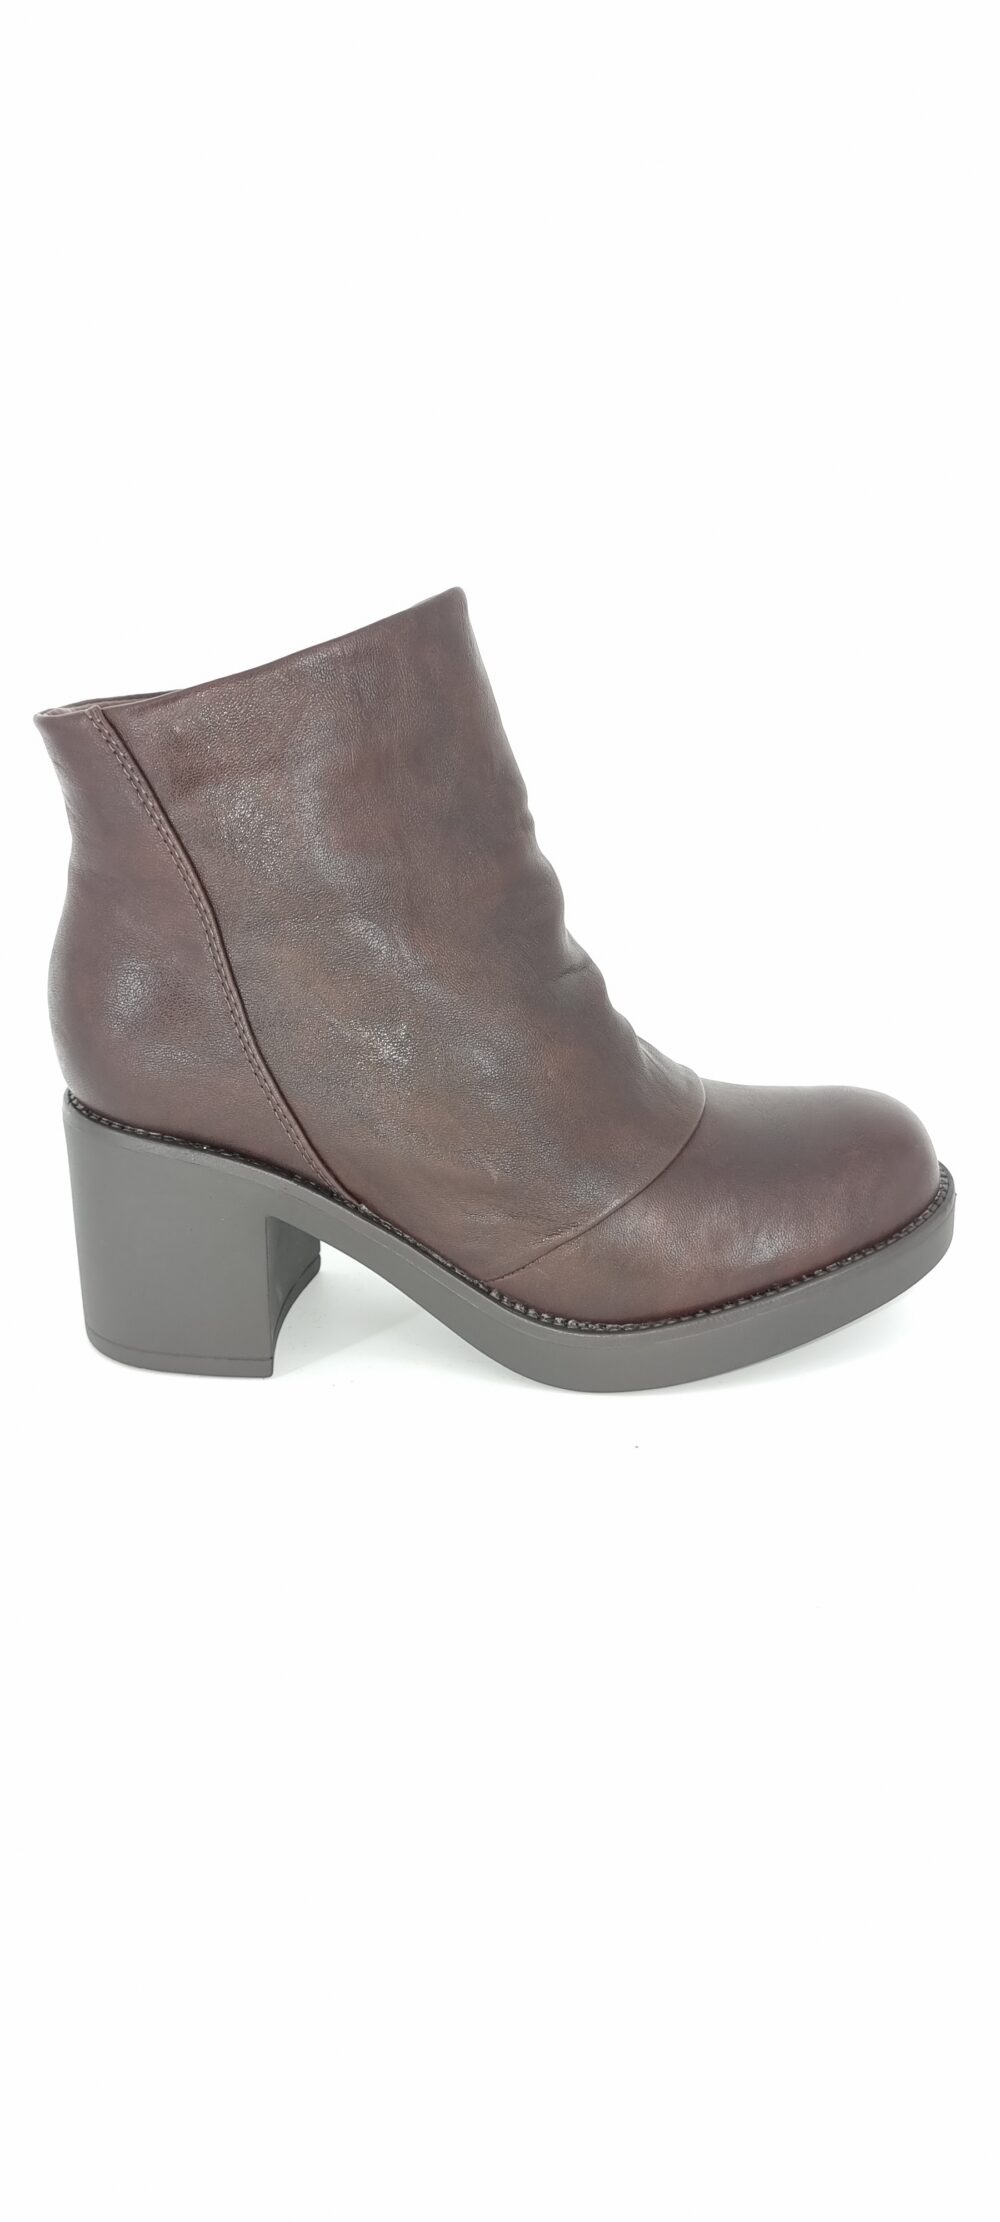 Round toe boot and low thick heel brown